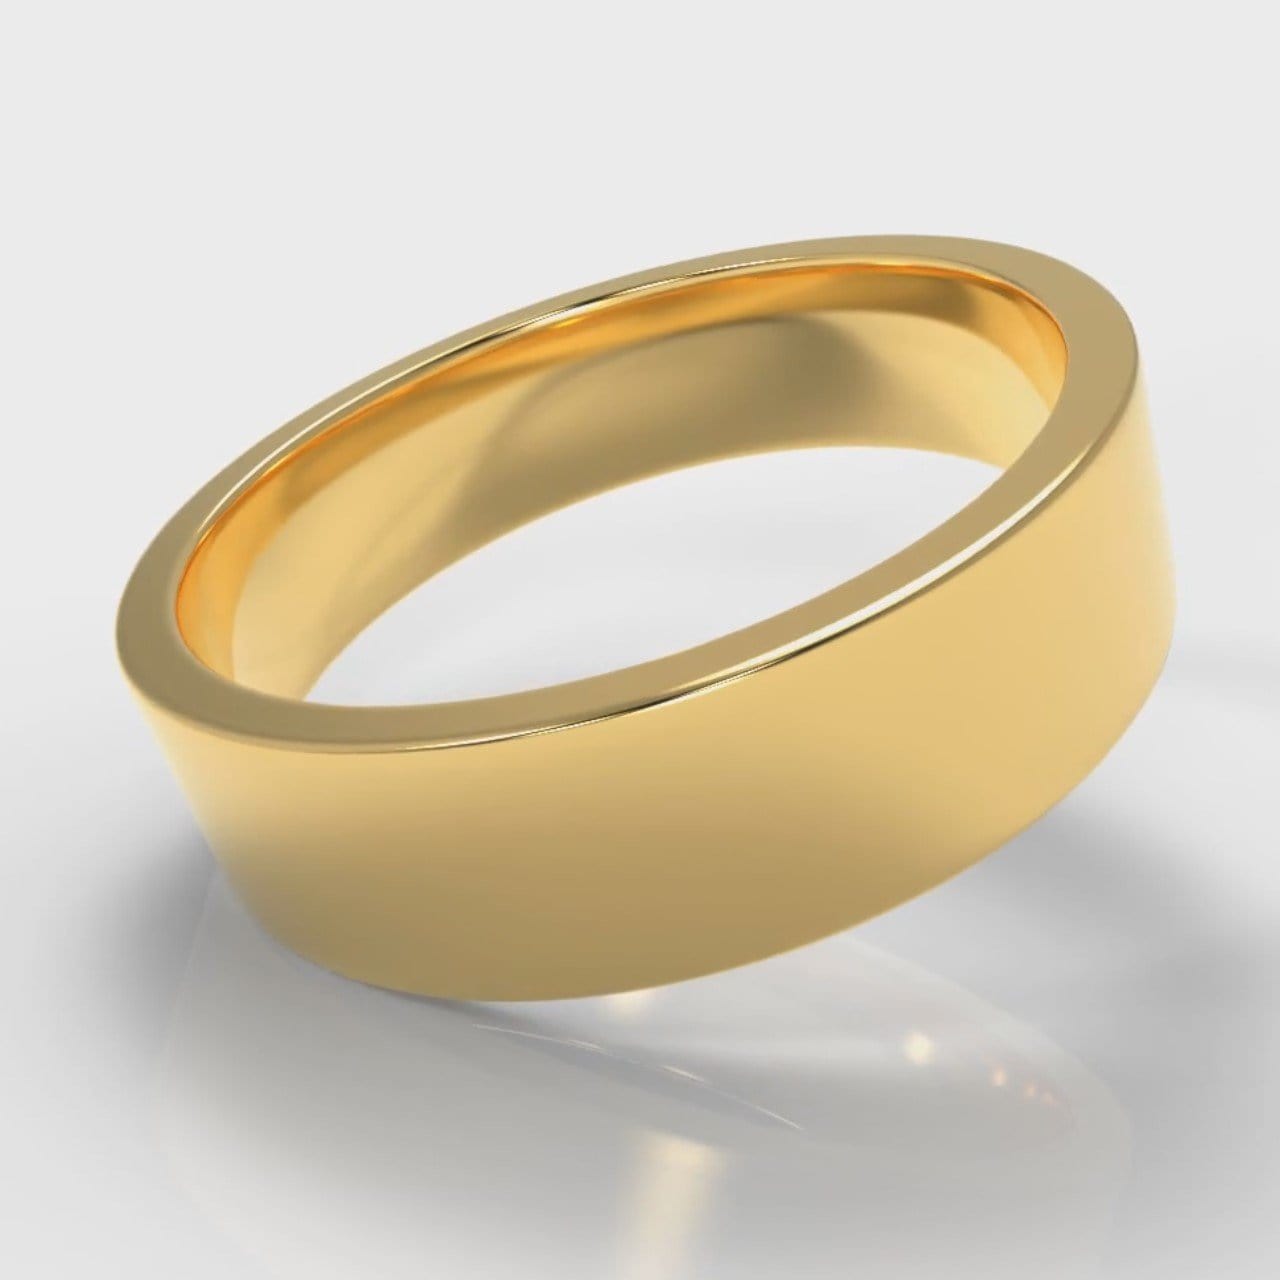 6mm Flat Top Comfort Fit Wedding Ring - Yellow Gold